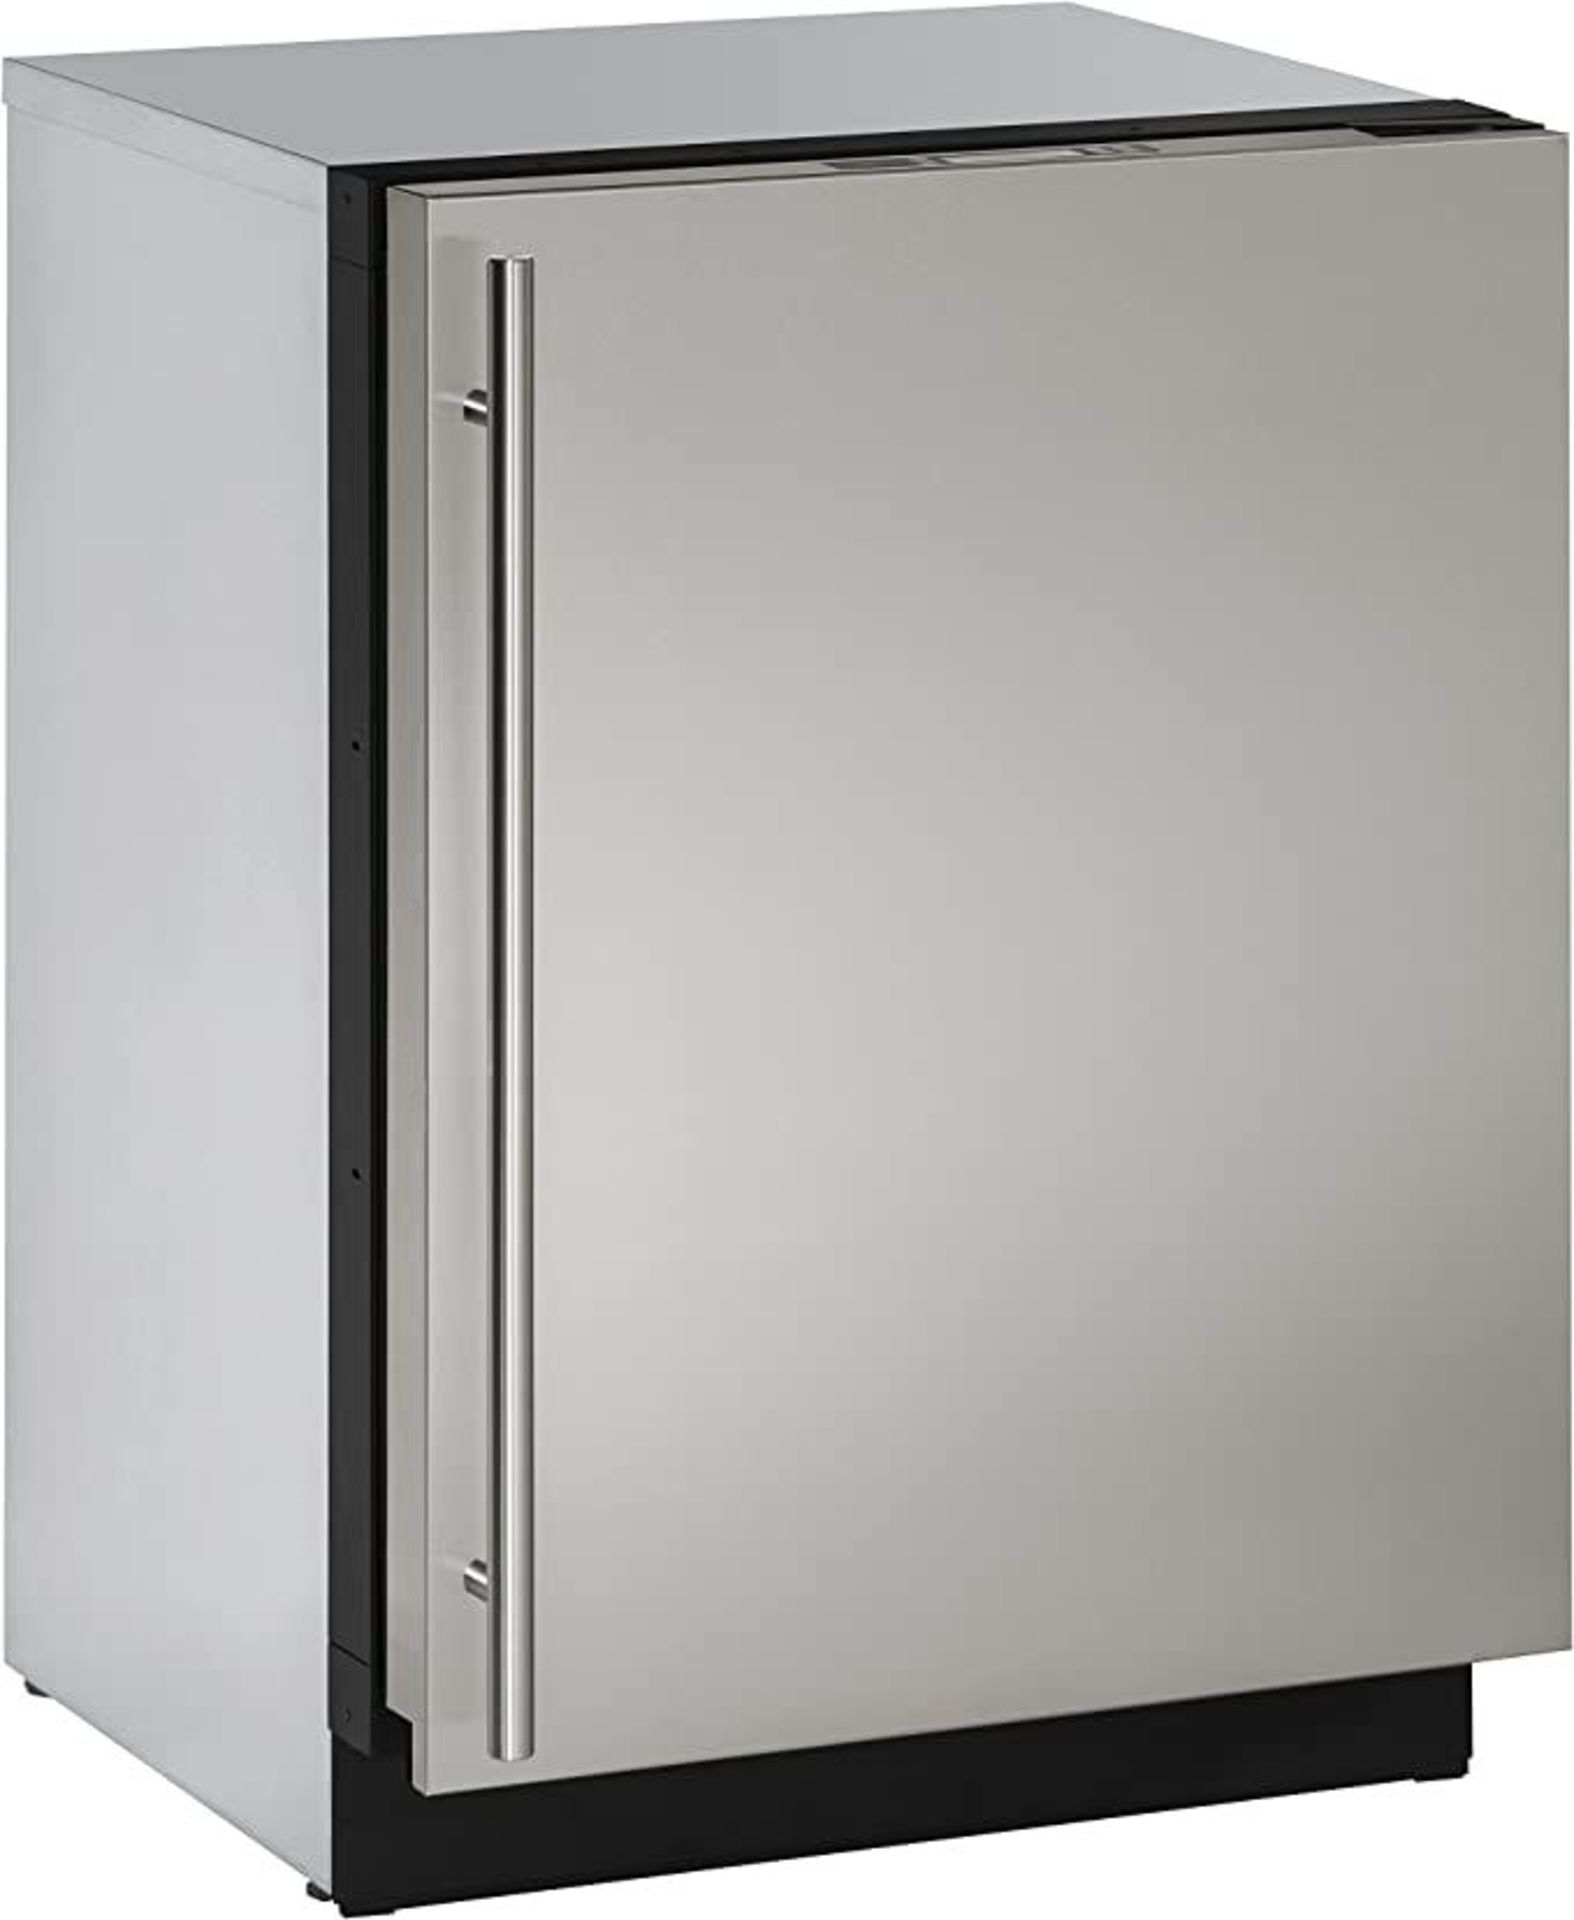 U-Line mod. U-3024RS-00A 24'' Solid Door Refrigerator, Stainless Steel, Right Hand Hinge